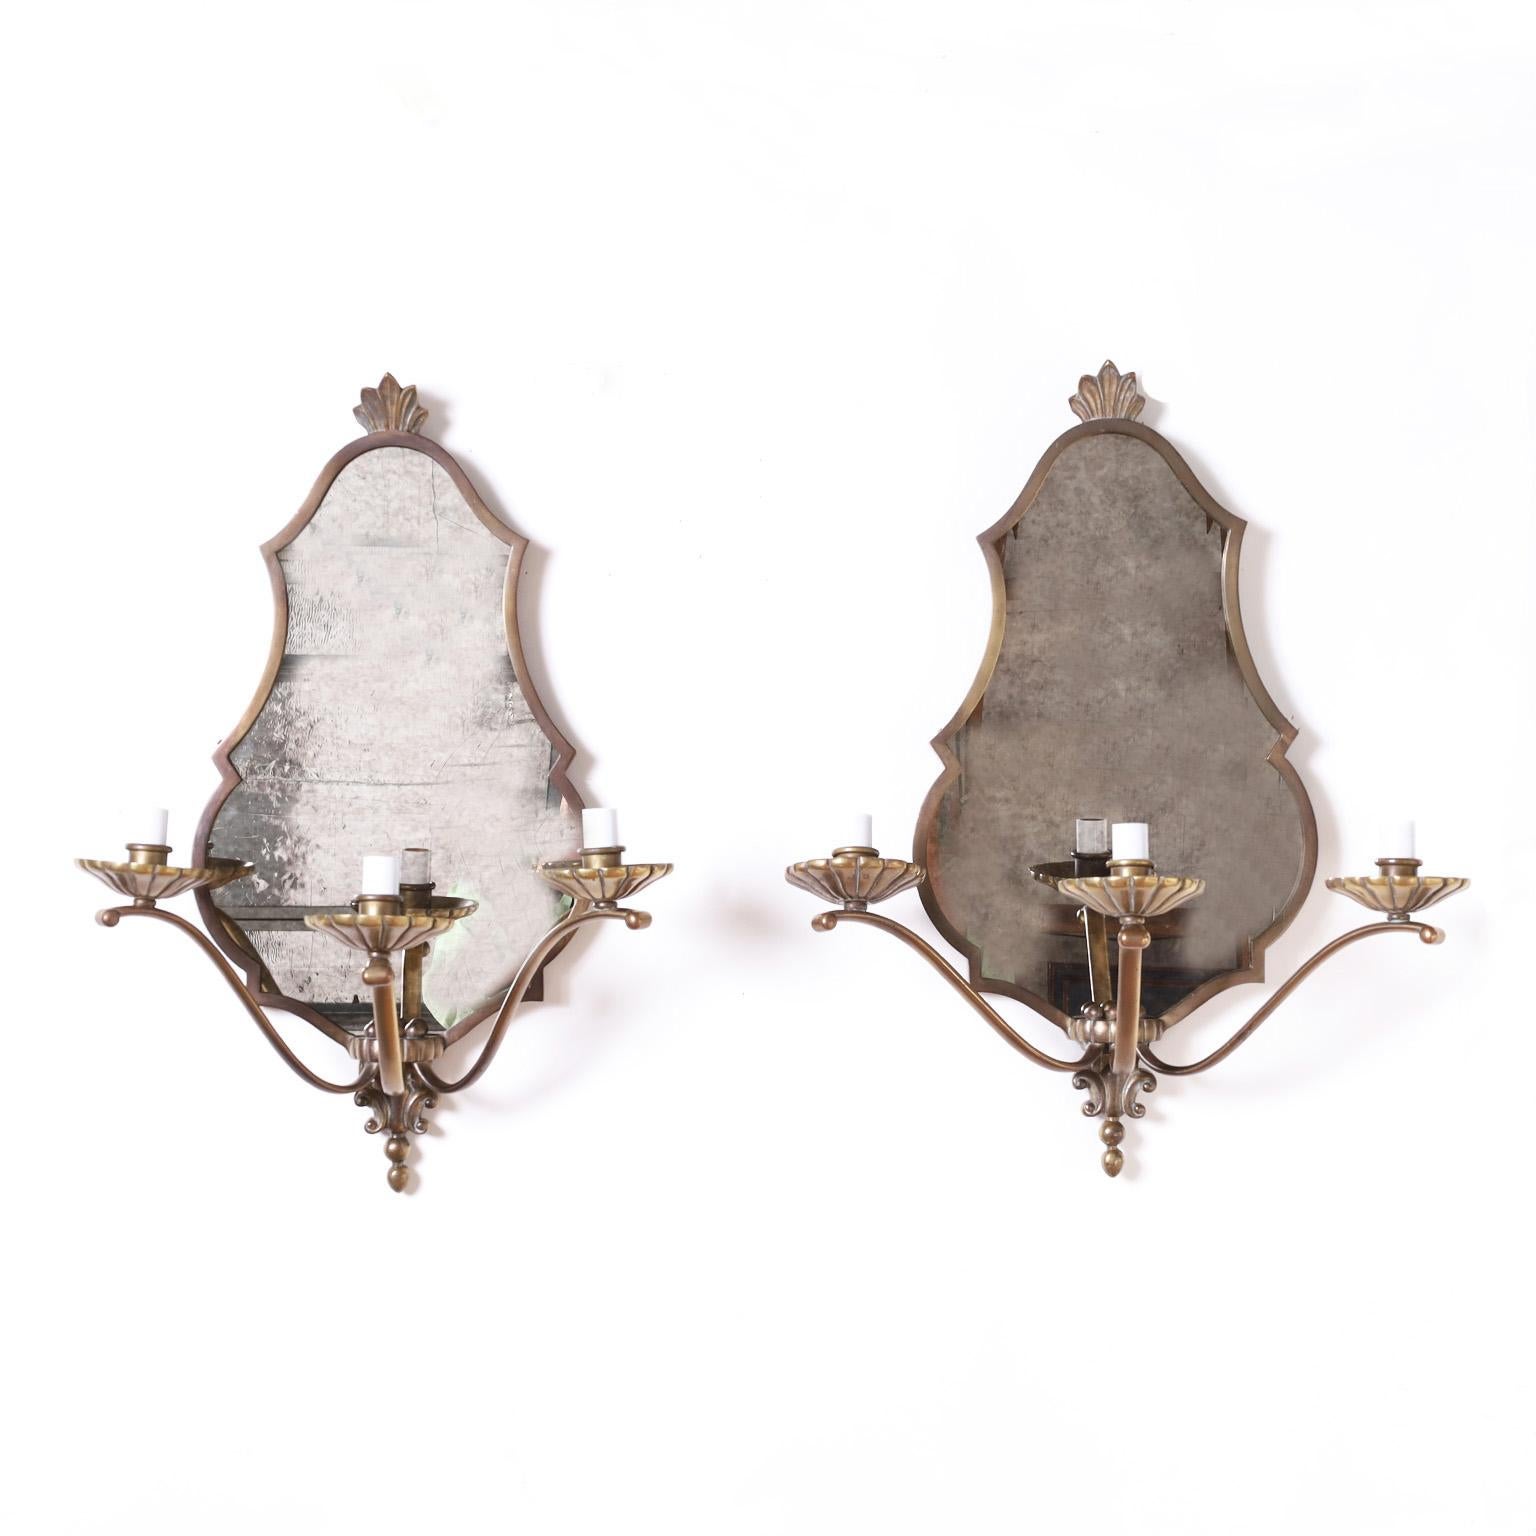 In vogue pair of three arm brass sconces with classic French form having early art deco influences and replaced distressed mirrors. Signed Jansen on the wooden back.